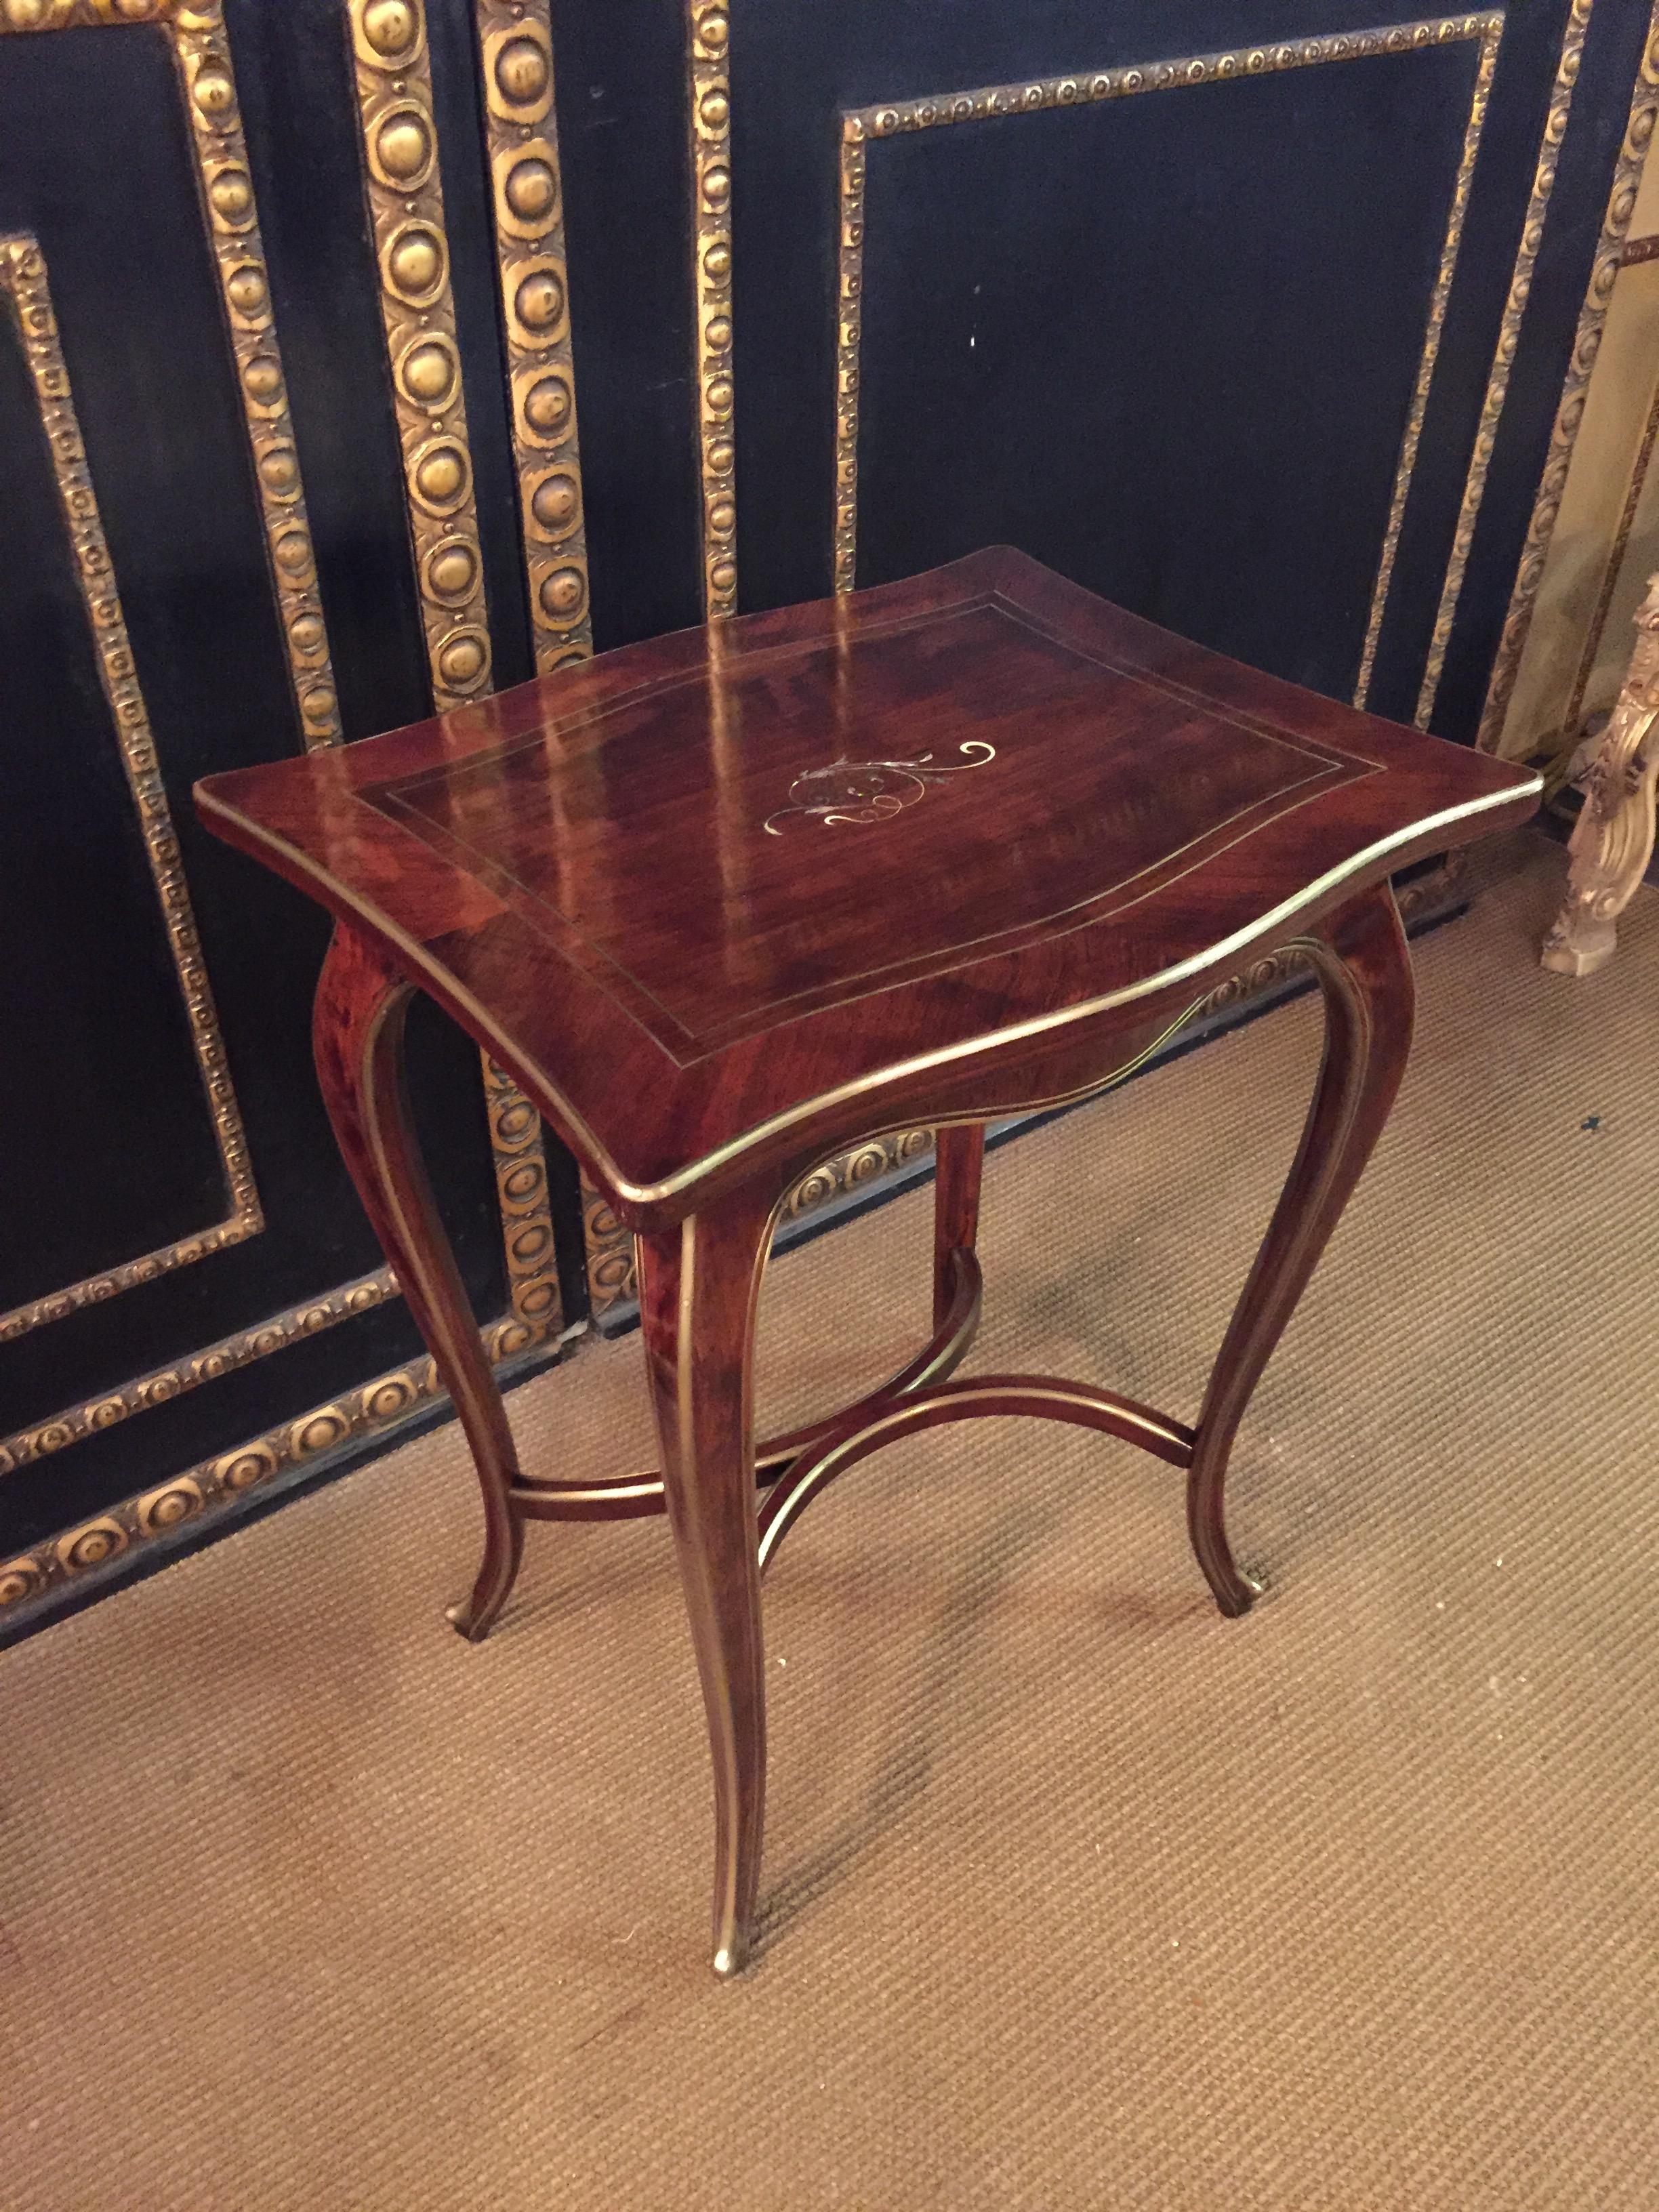 Inlay Antique Biedermeier Table Mahogany Inlaid with Mother Pearl 1870